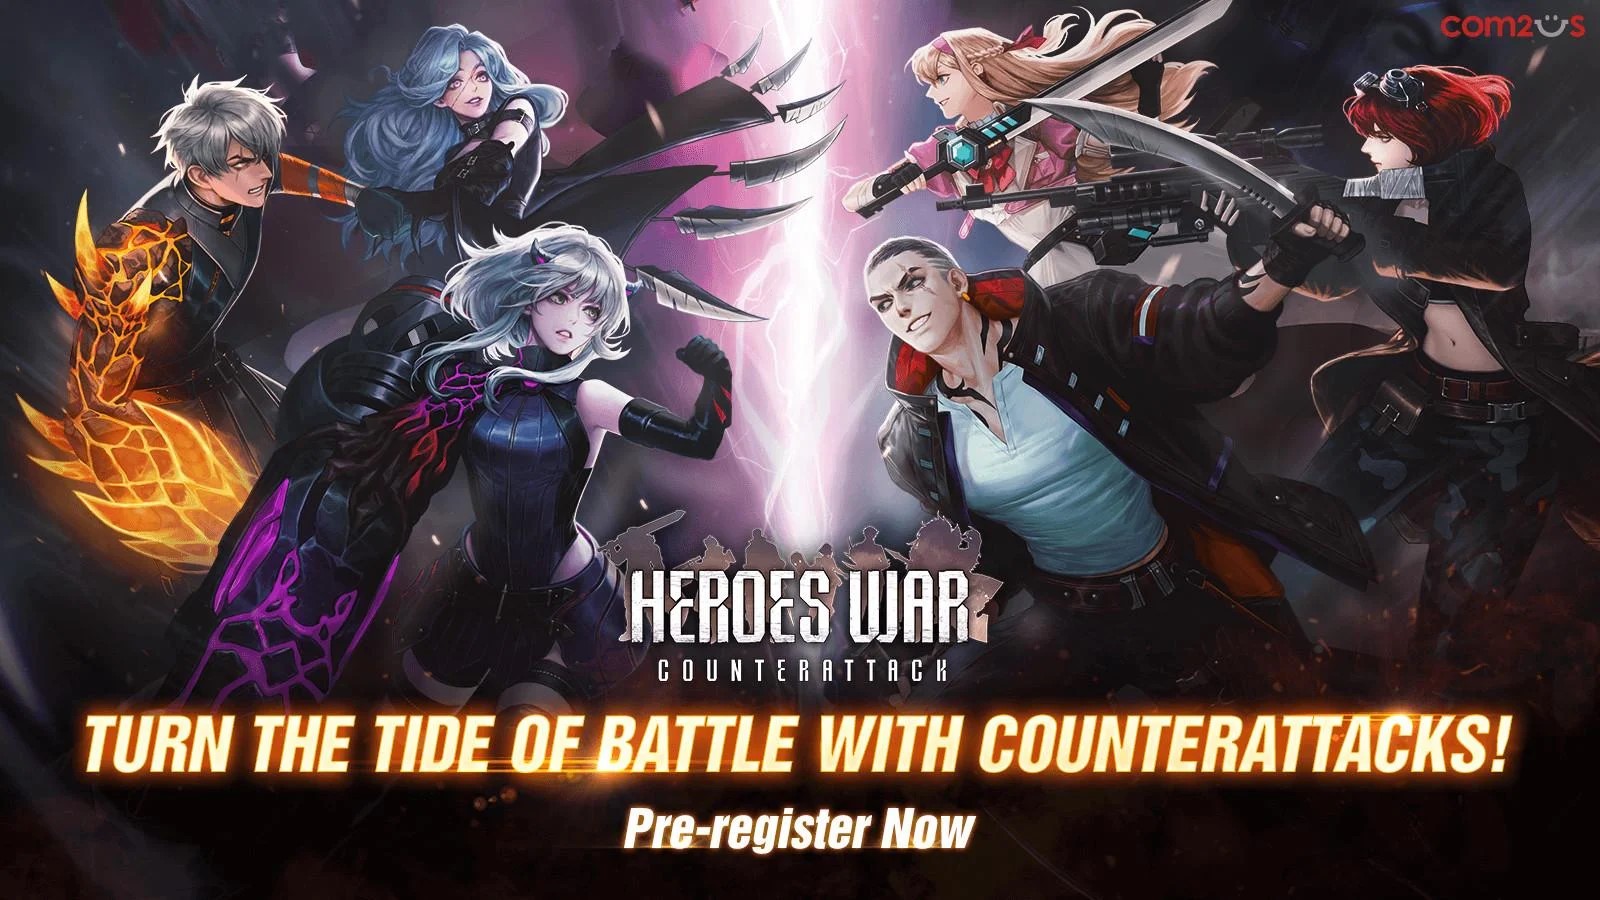 Heroes War: Counterattack – Release Date, Features, and Other Interesting Details